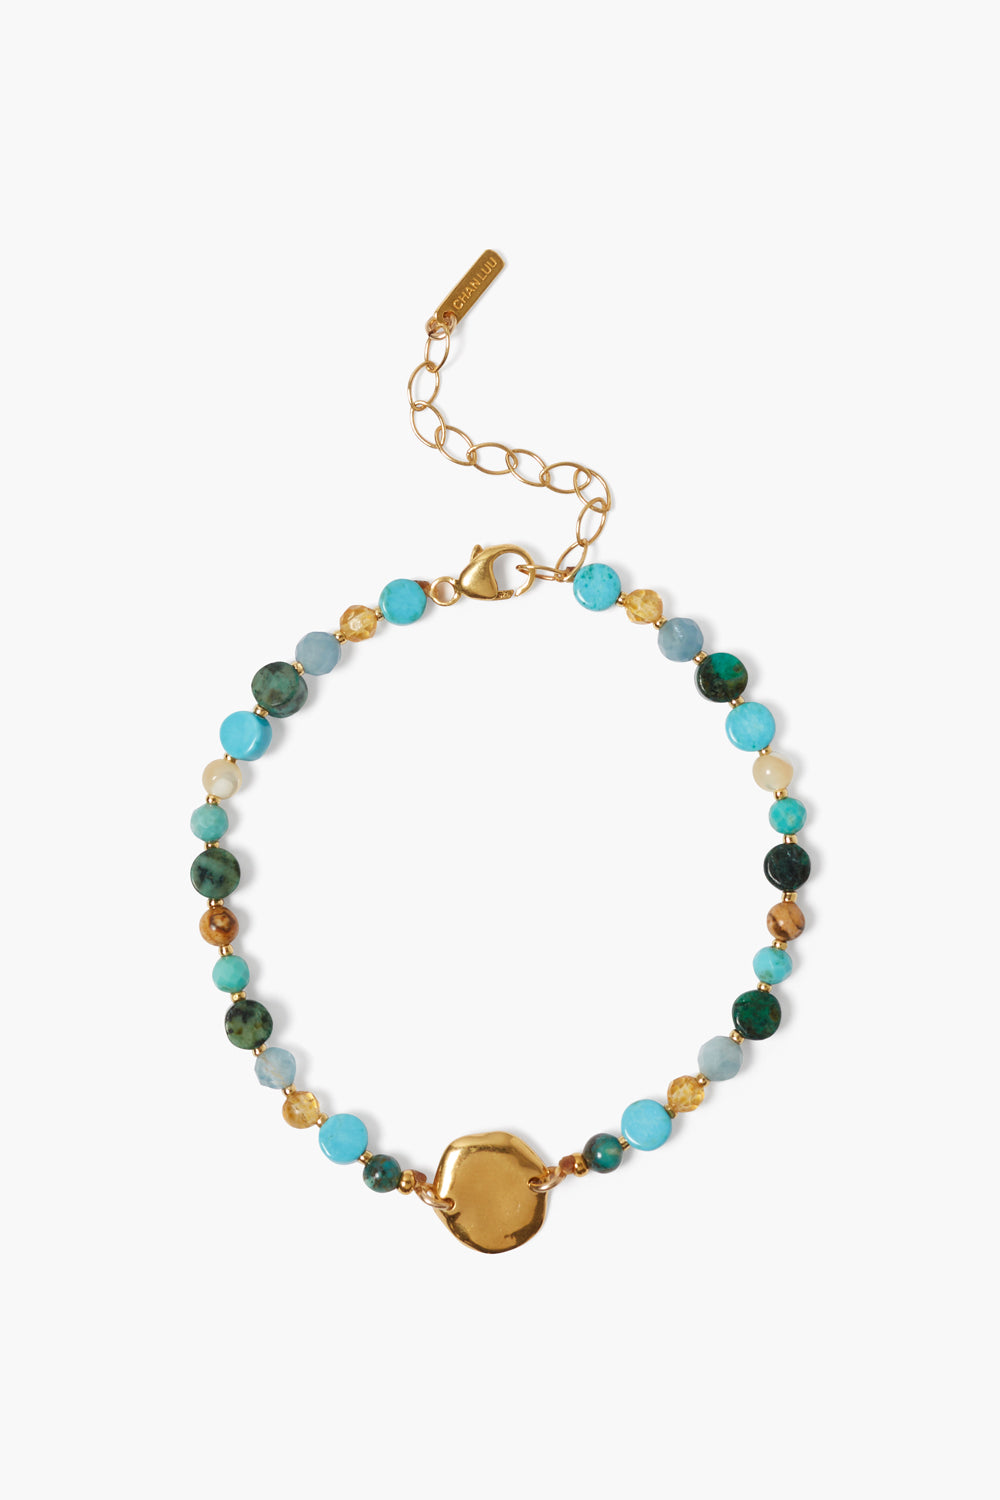 GOLD PLATED STERLING SILVER BRACELET-TURQUOISE MIX